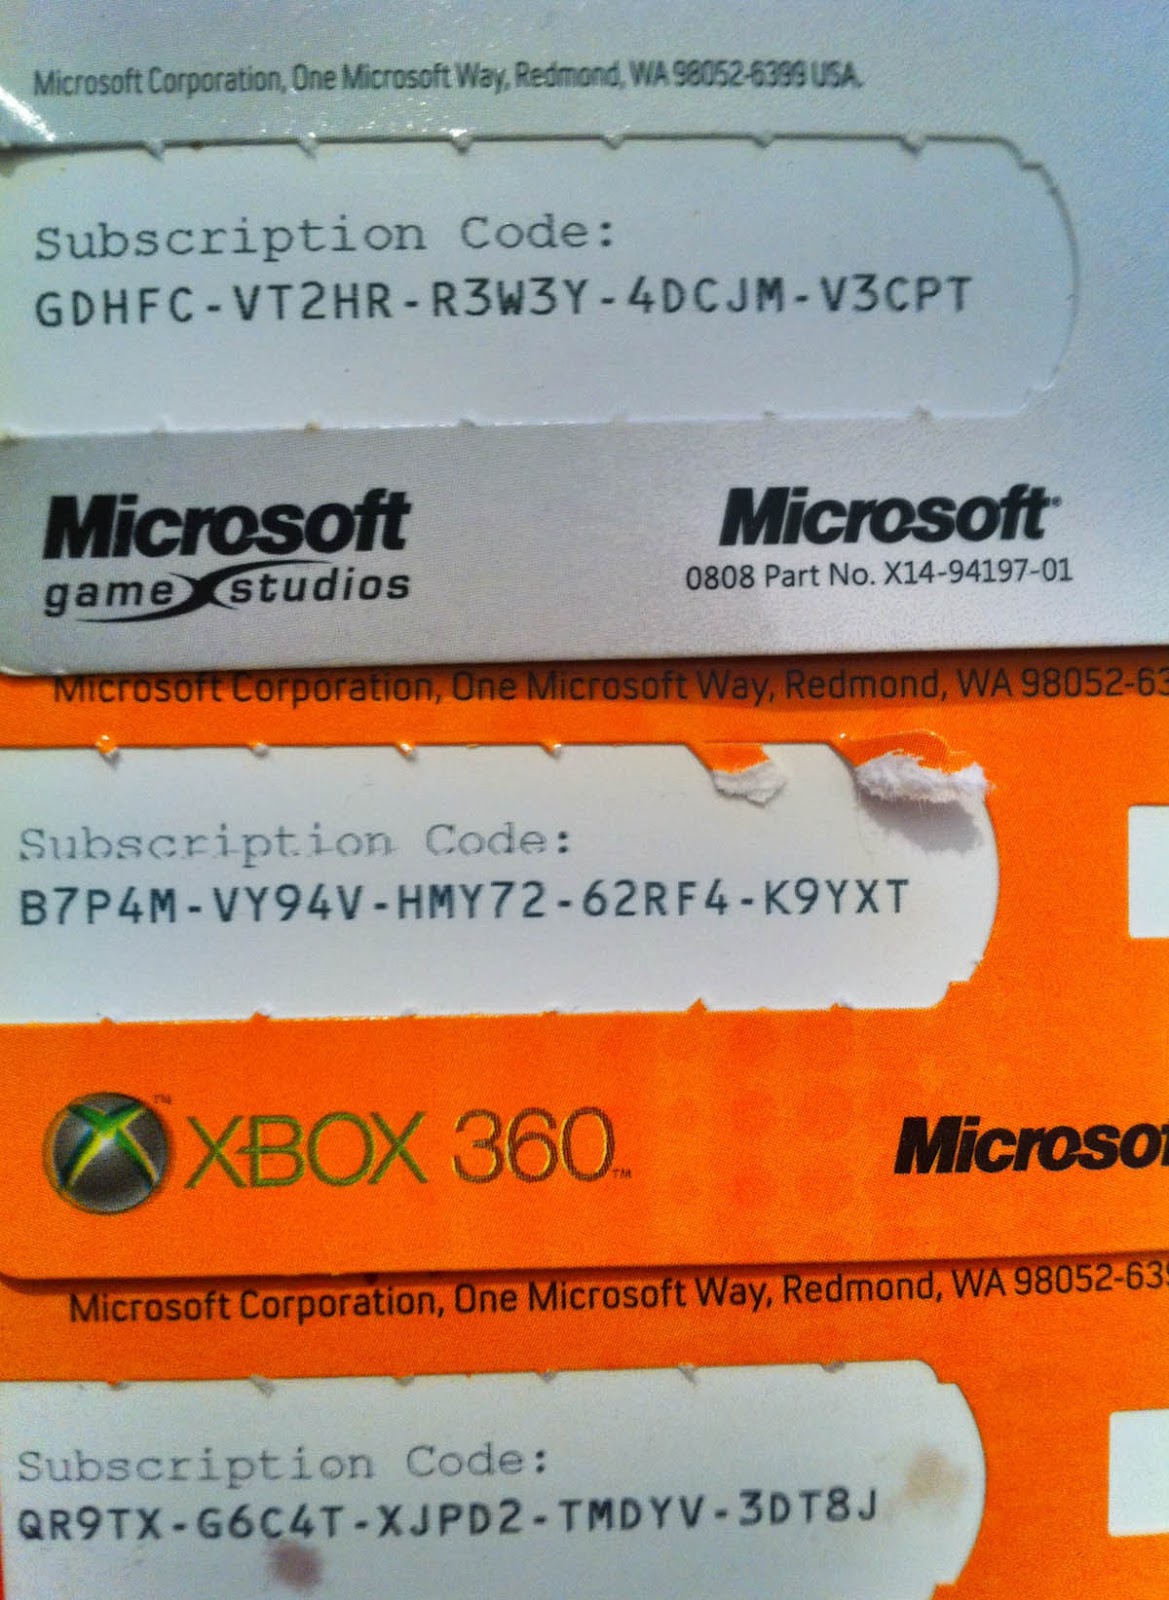 How can you get Microsoft points codes?